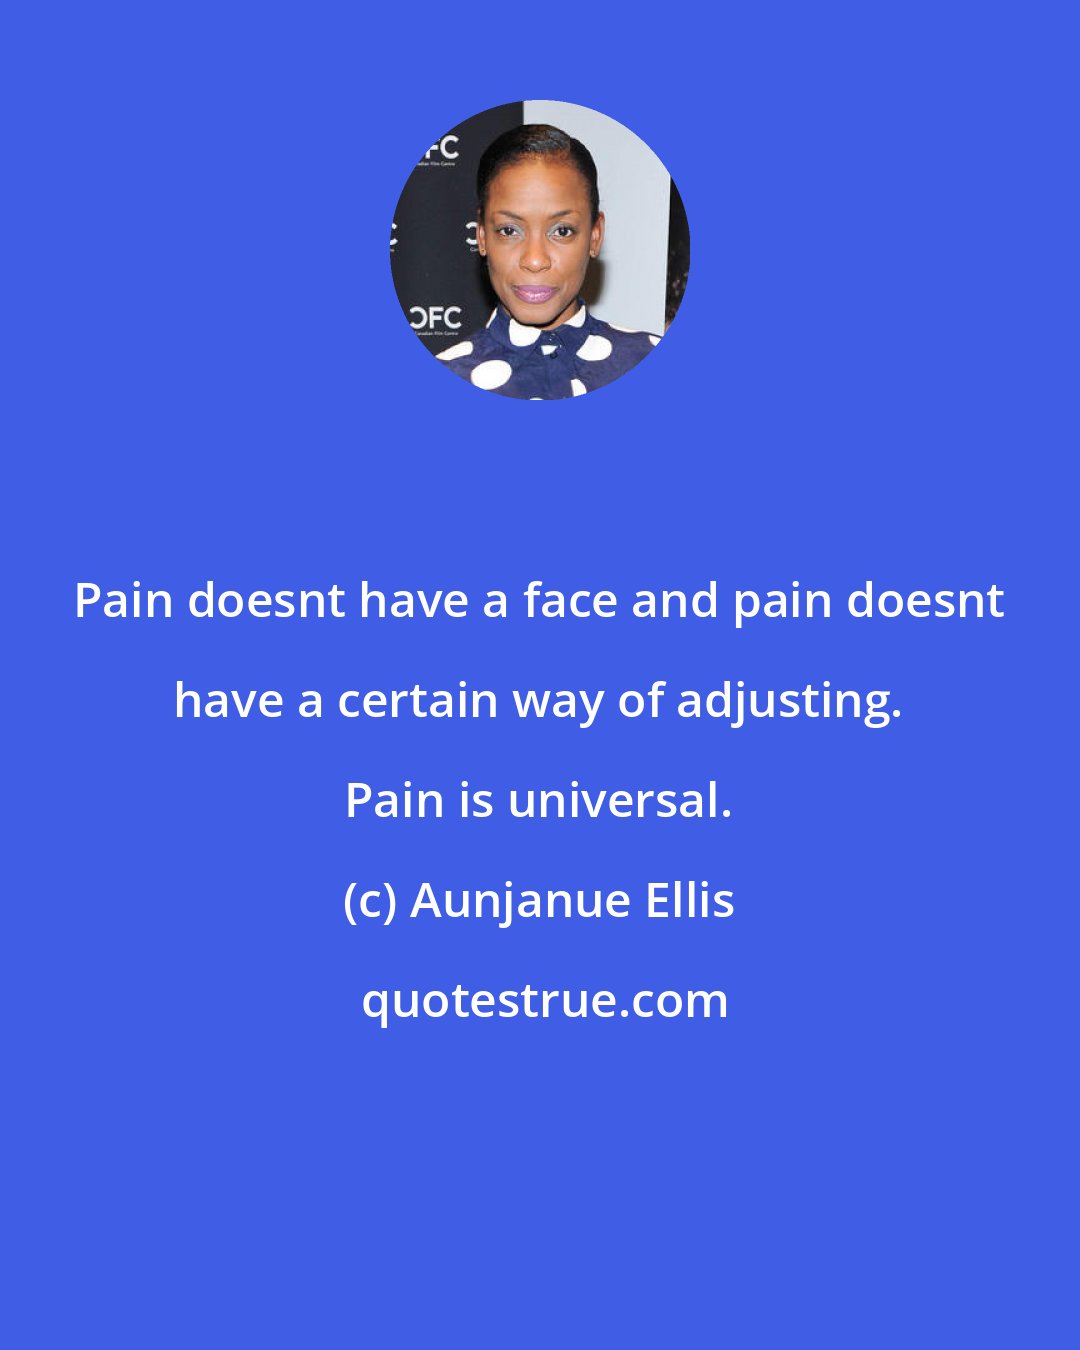 Aunjanue Ellis: Pain doesnt have a face and pain doesnt have a certain way of adjusting. Pain is universal.